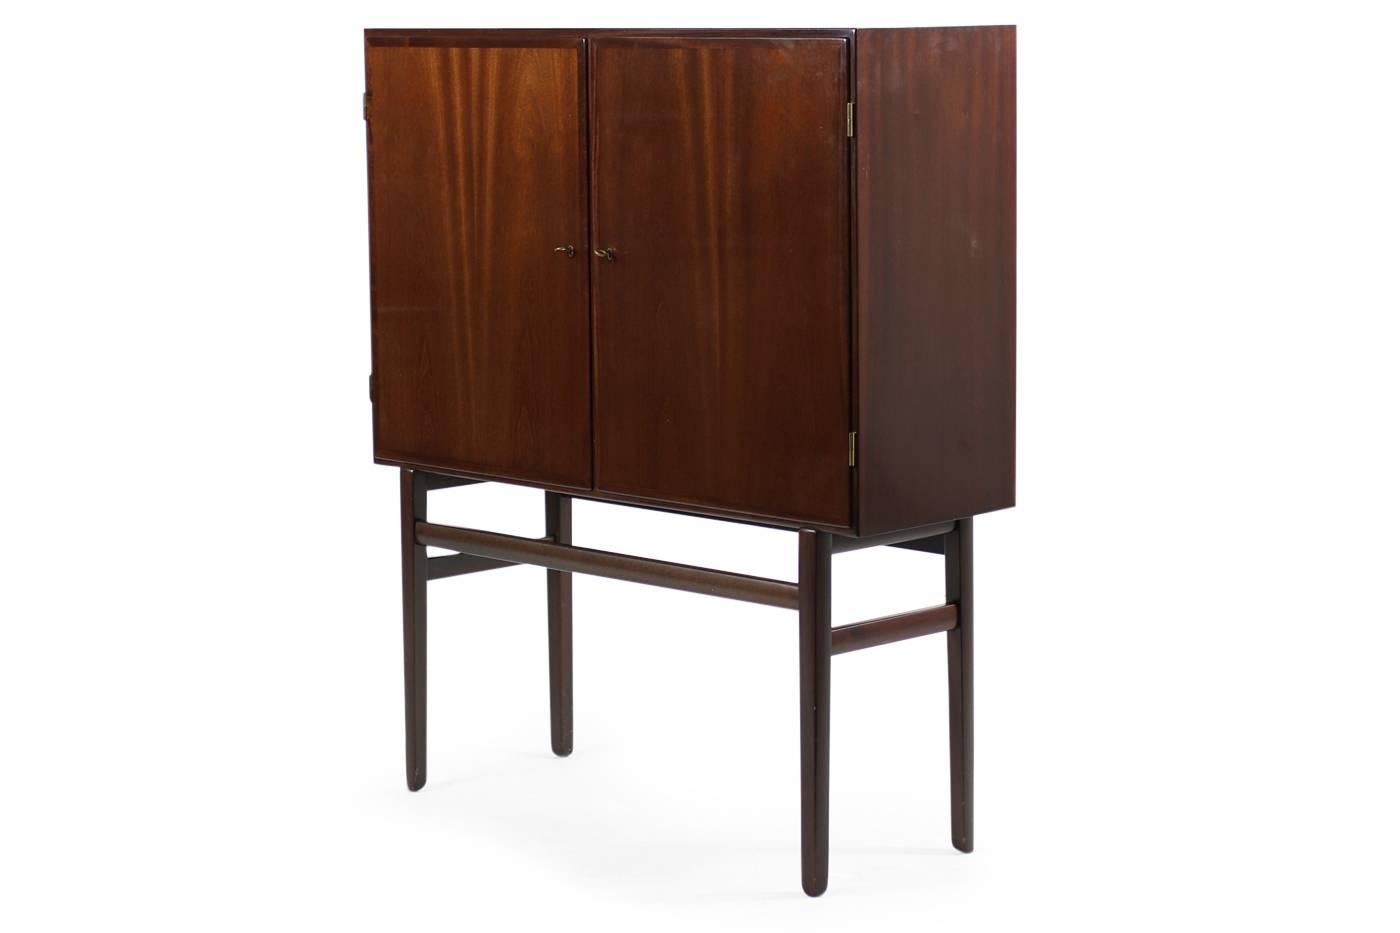 Beautiful 1960s Ole Wanscher highboard (high sideboard) for Poul Jeppesen Denmark, Mahogany, two doors, all keys incl. brass hinges, a matching sideboard is also available, please check our 1stdibs storefront.
Also available, the matching Ole